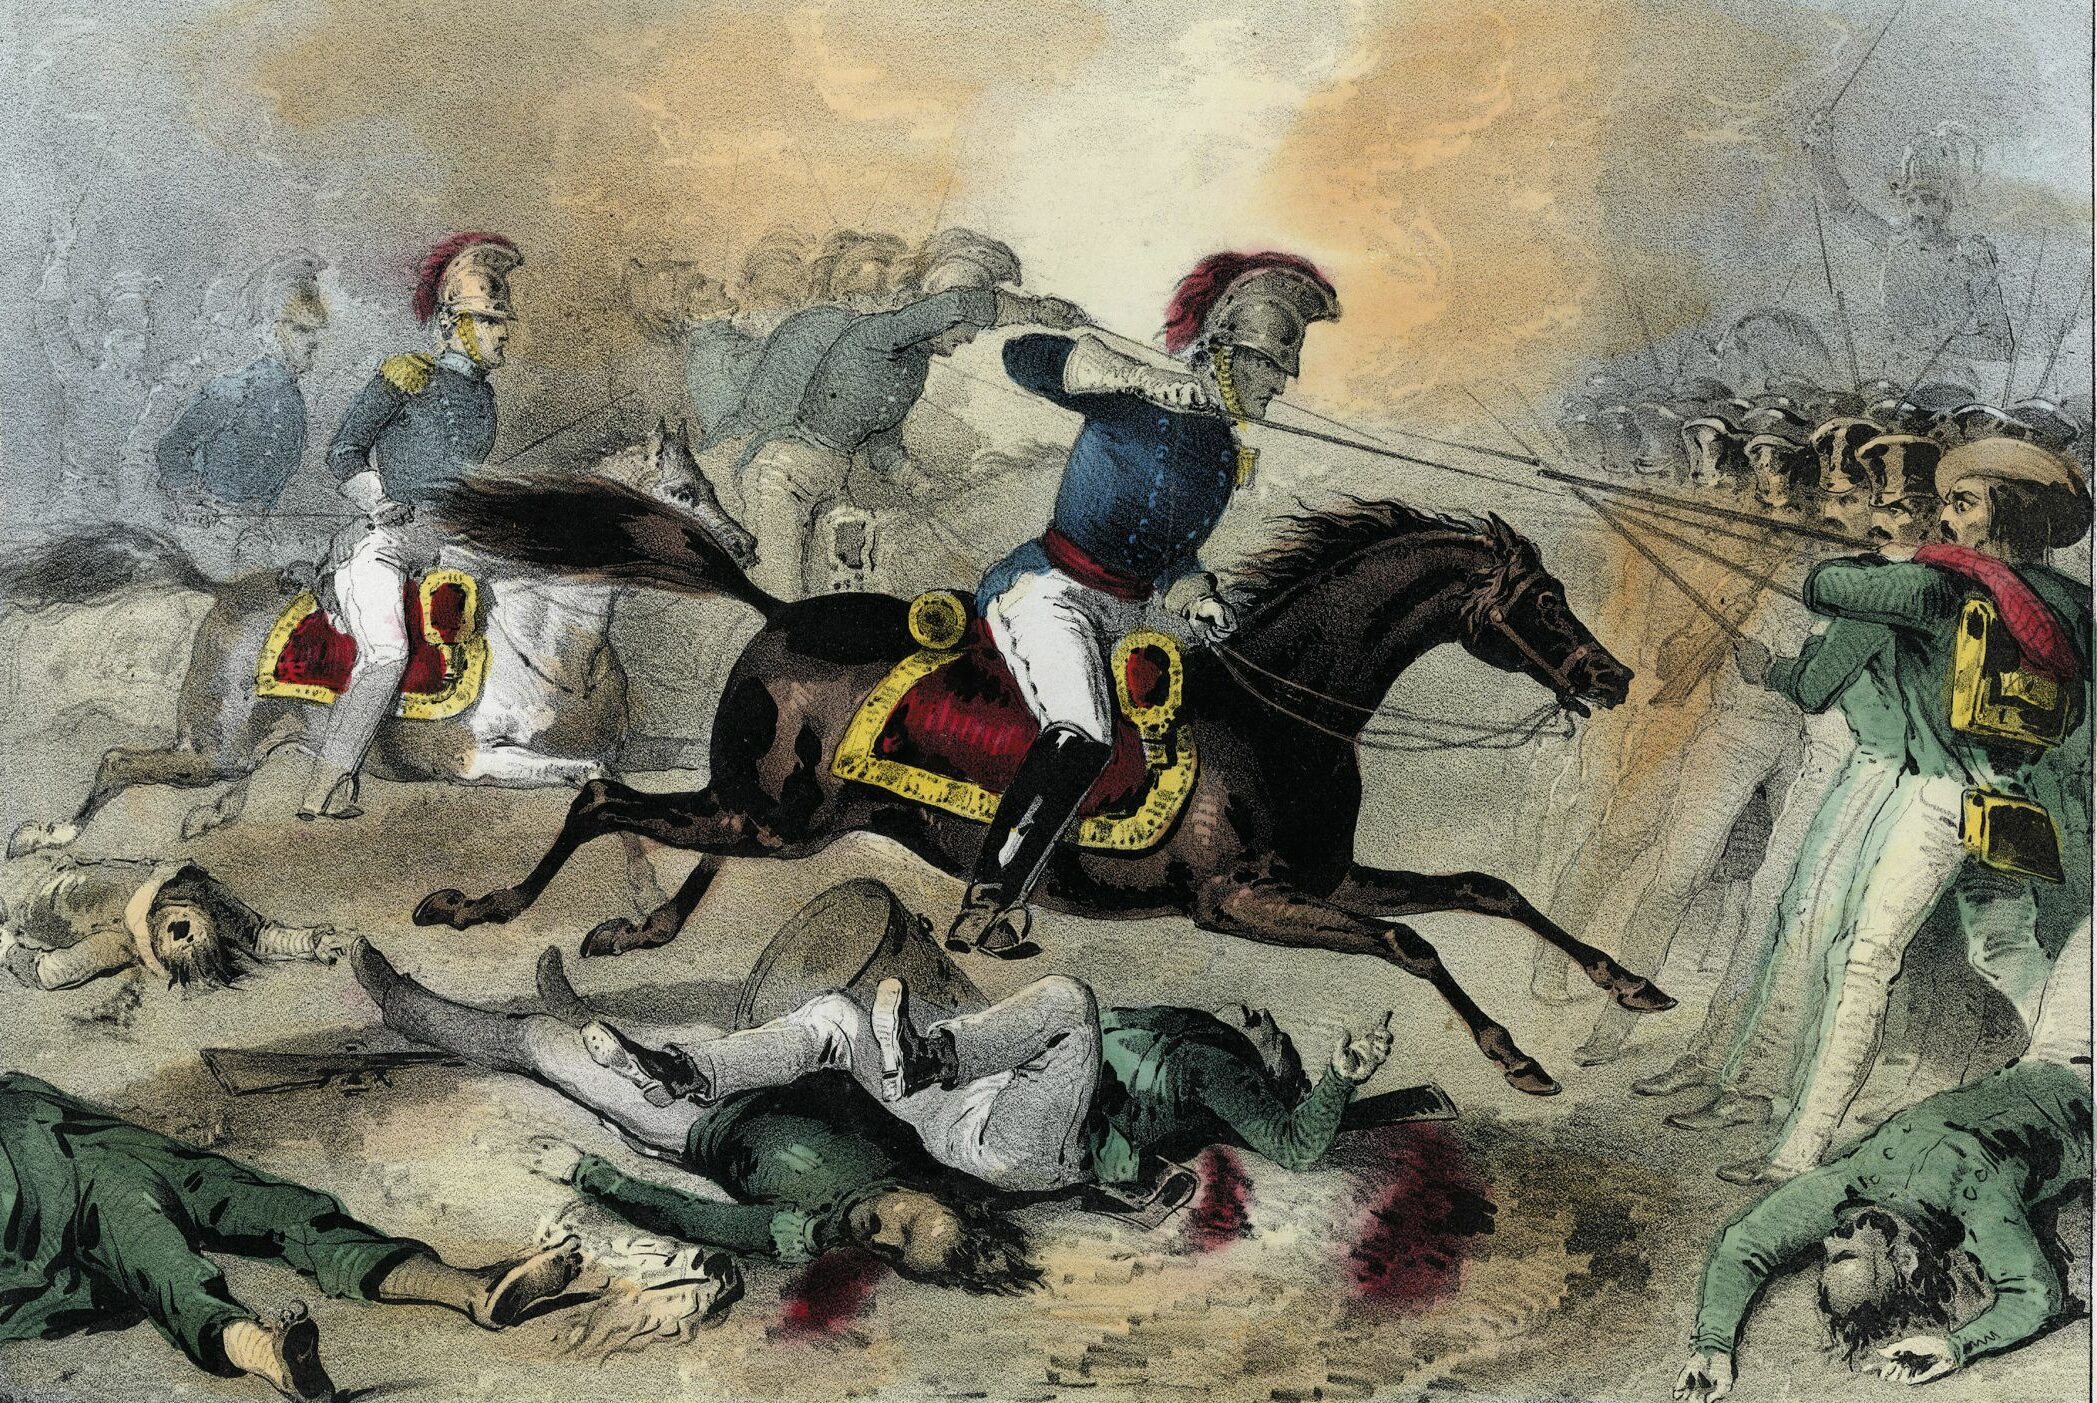 Colonel Humphrey Marshall’s Kentucky cavalry, augmented by veteran dragoons, splits the Mexican flank and drives it from the field.